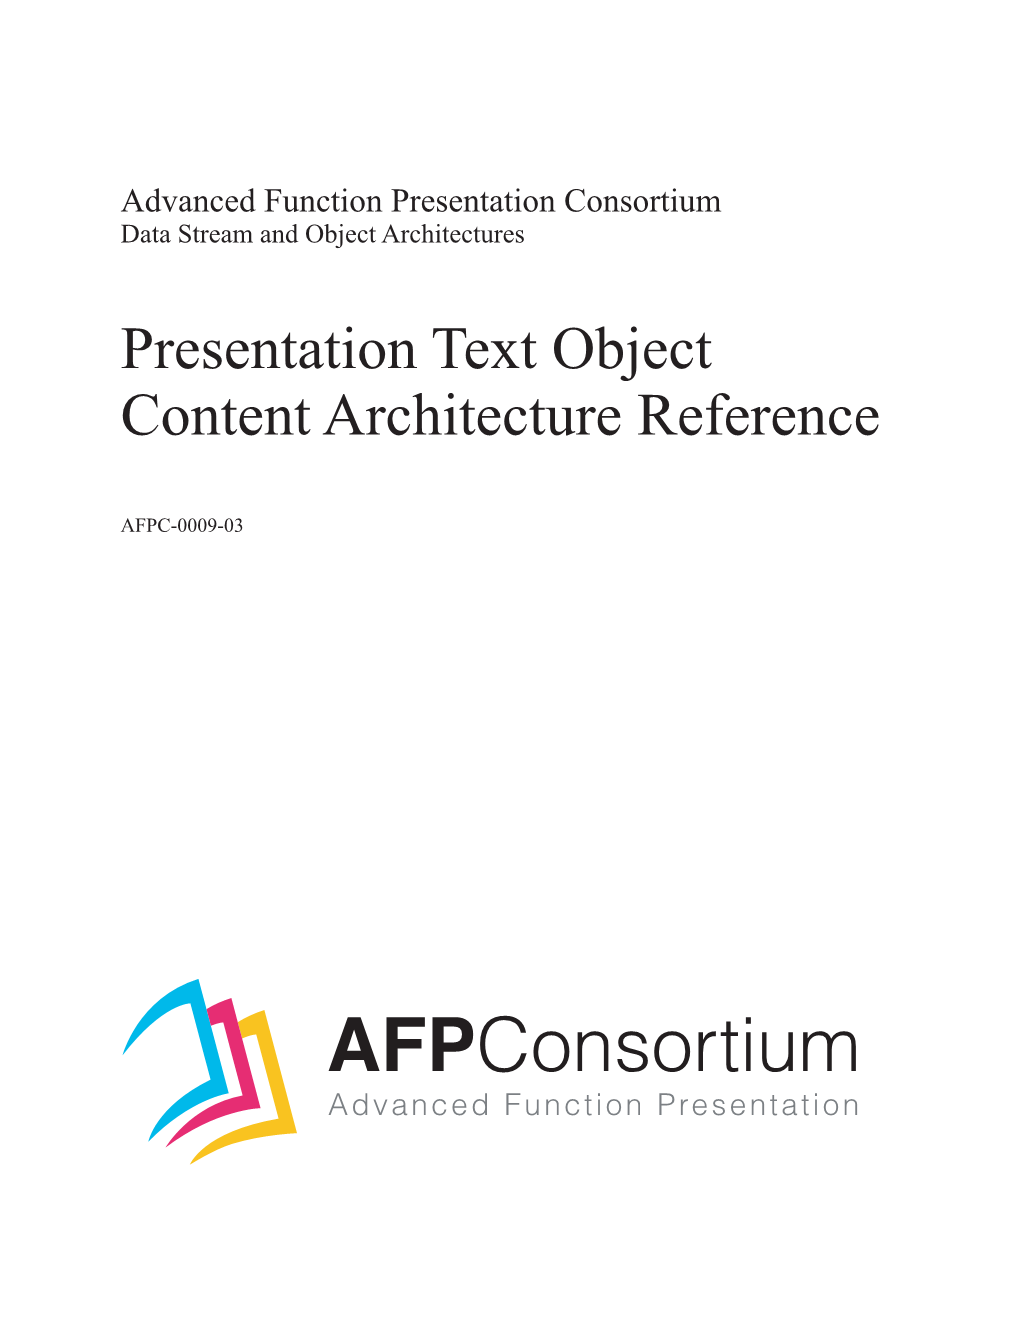 PTOCA Reference (Presentation Text Object Content Architecture